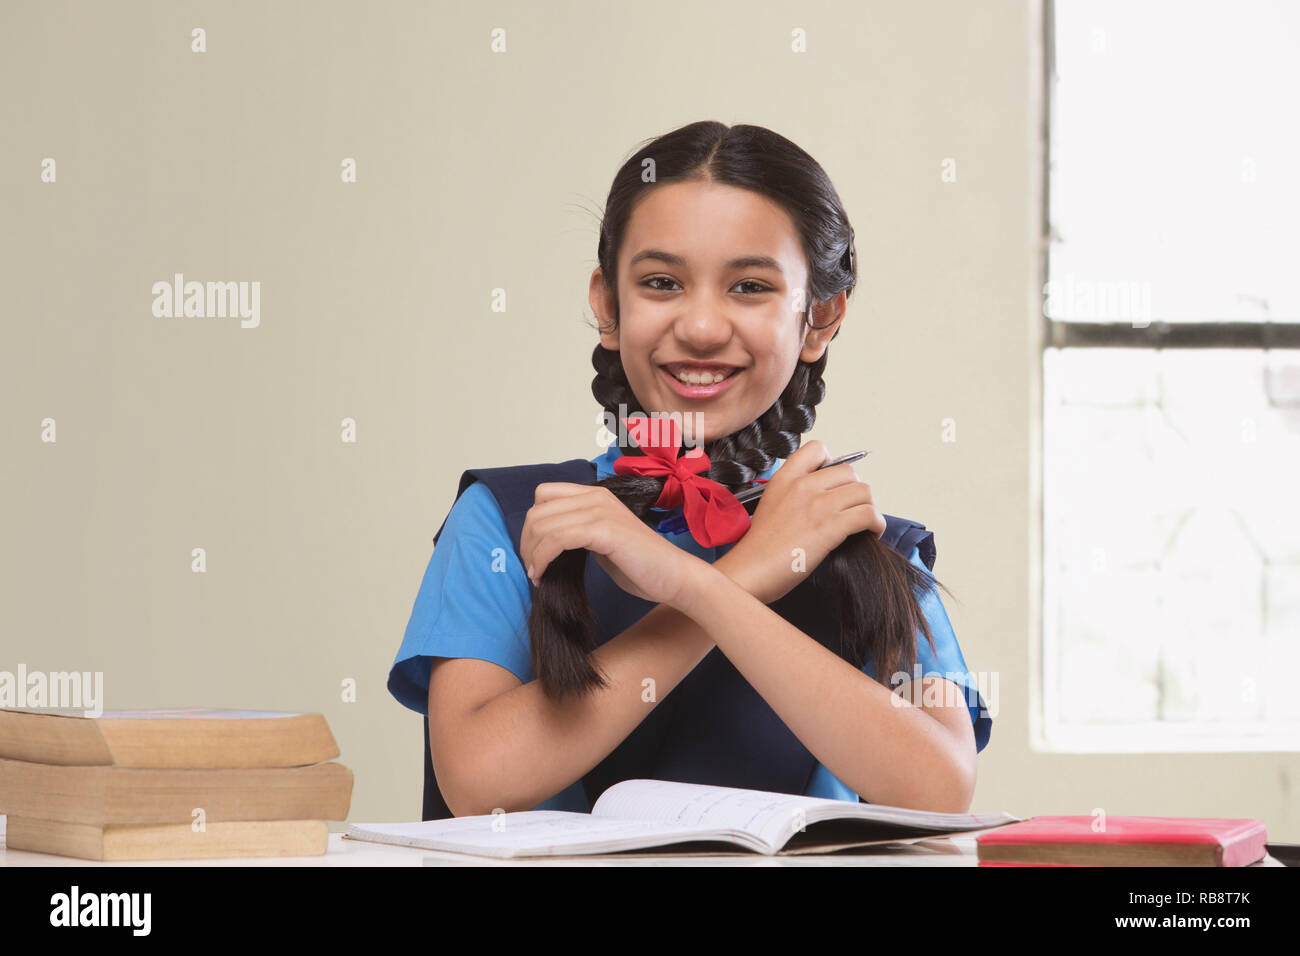 Rural girl in school uniform playing with her hair while studying Stock Photo